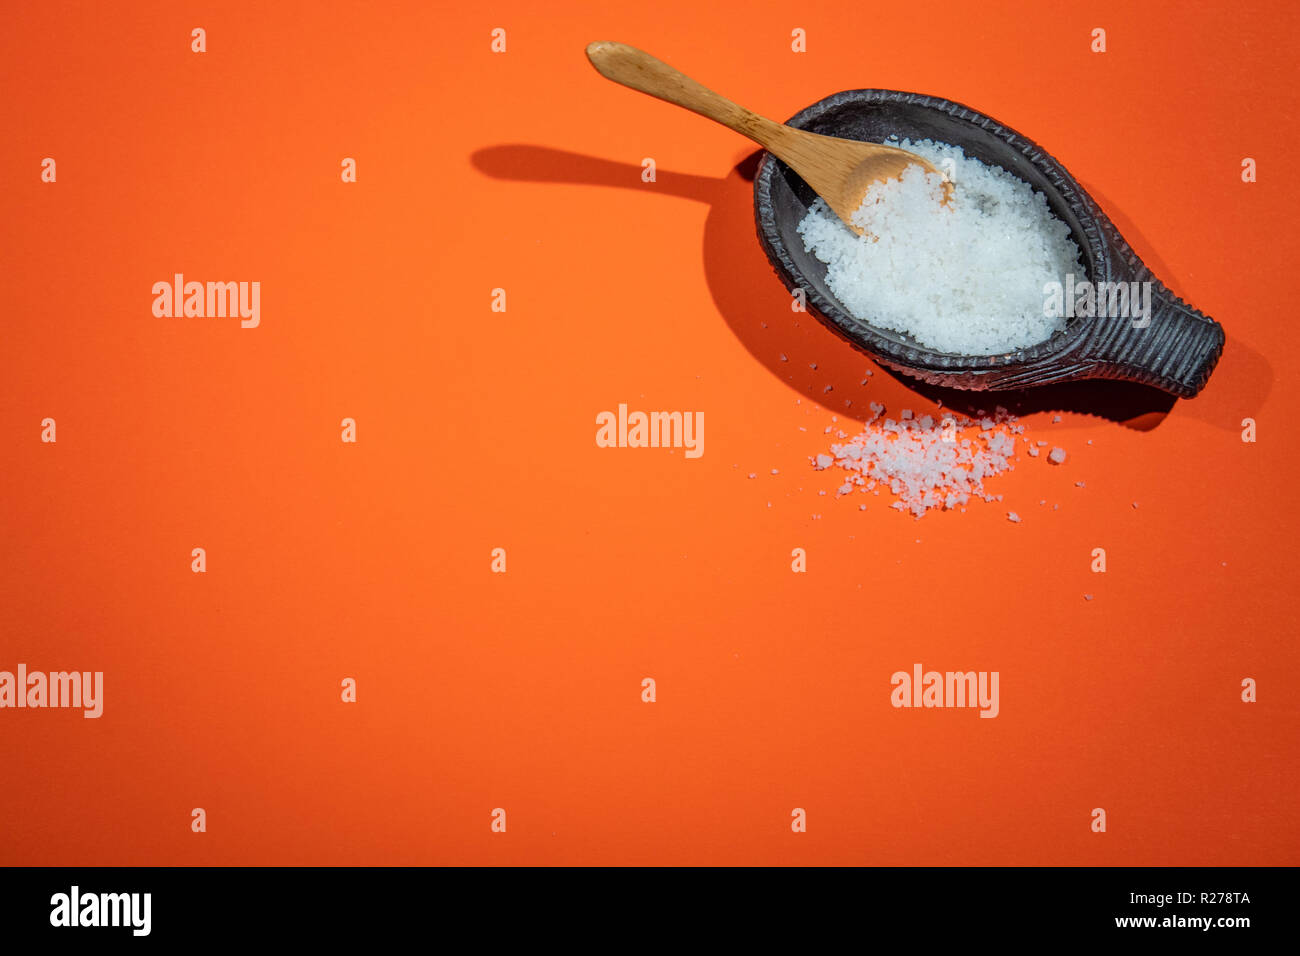 coarse salt in small decorative bowl with wooden spoon on orange background Stock Photo